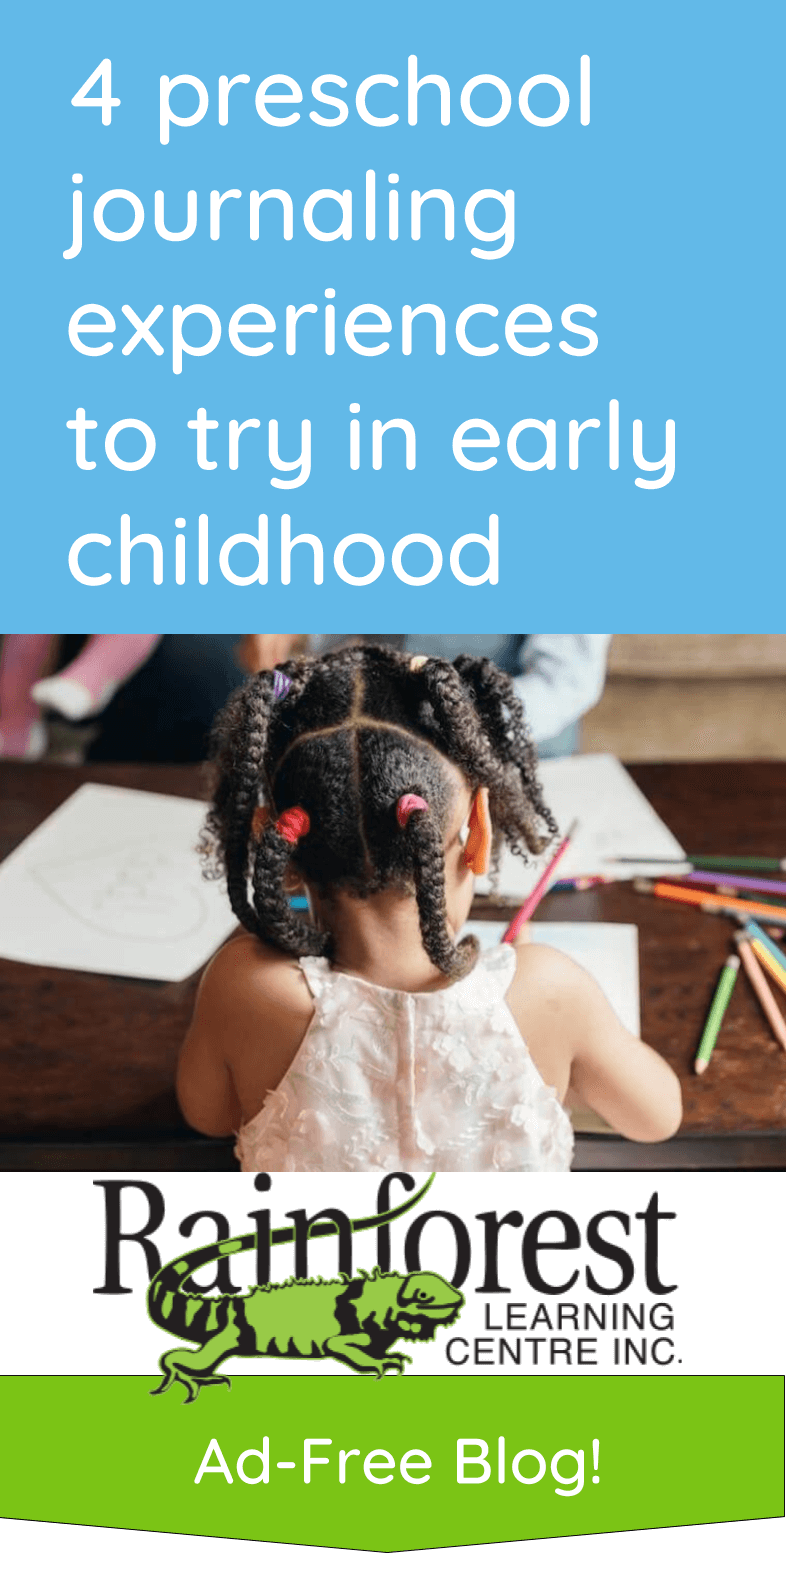 4 preschool journaling experiences to try in early childhood article - pinterest image